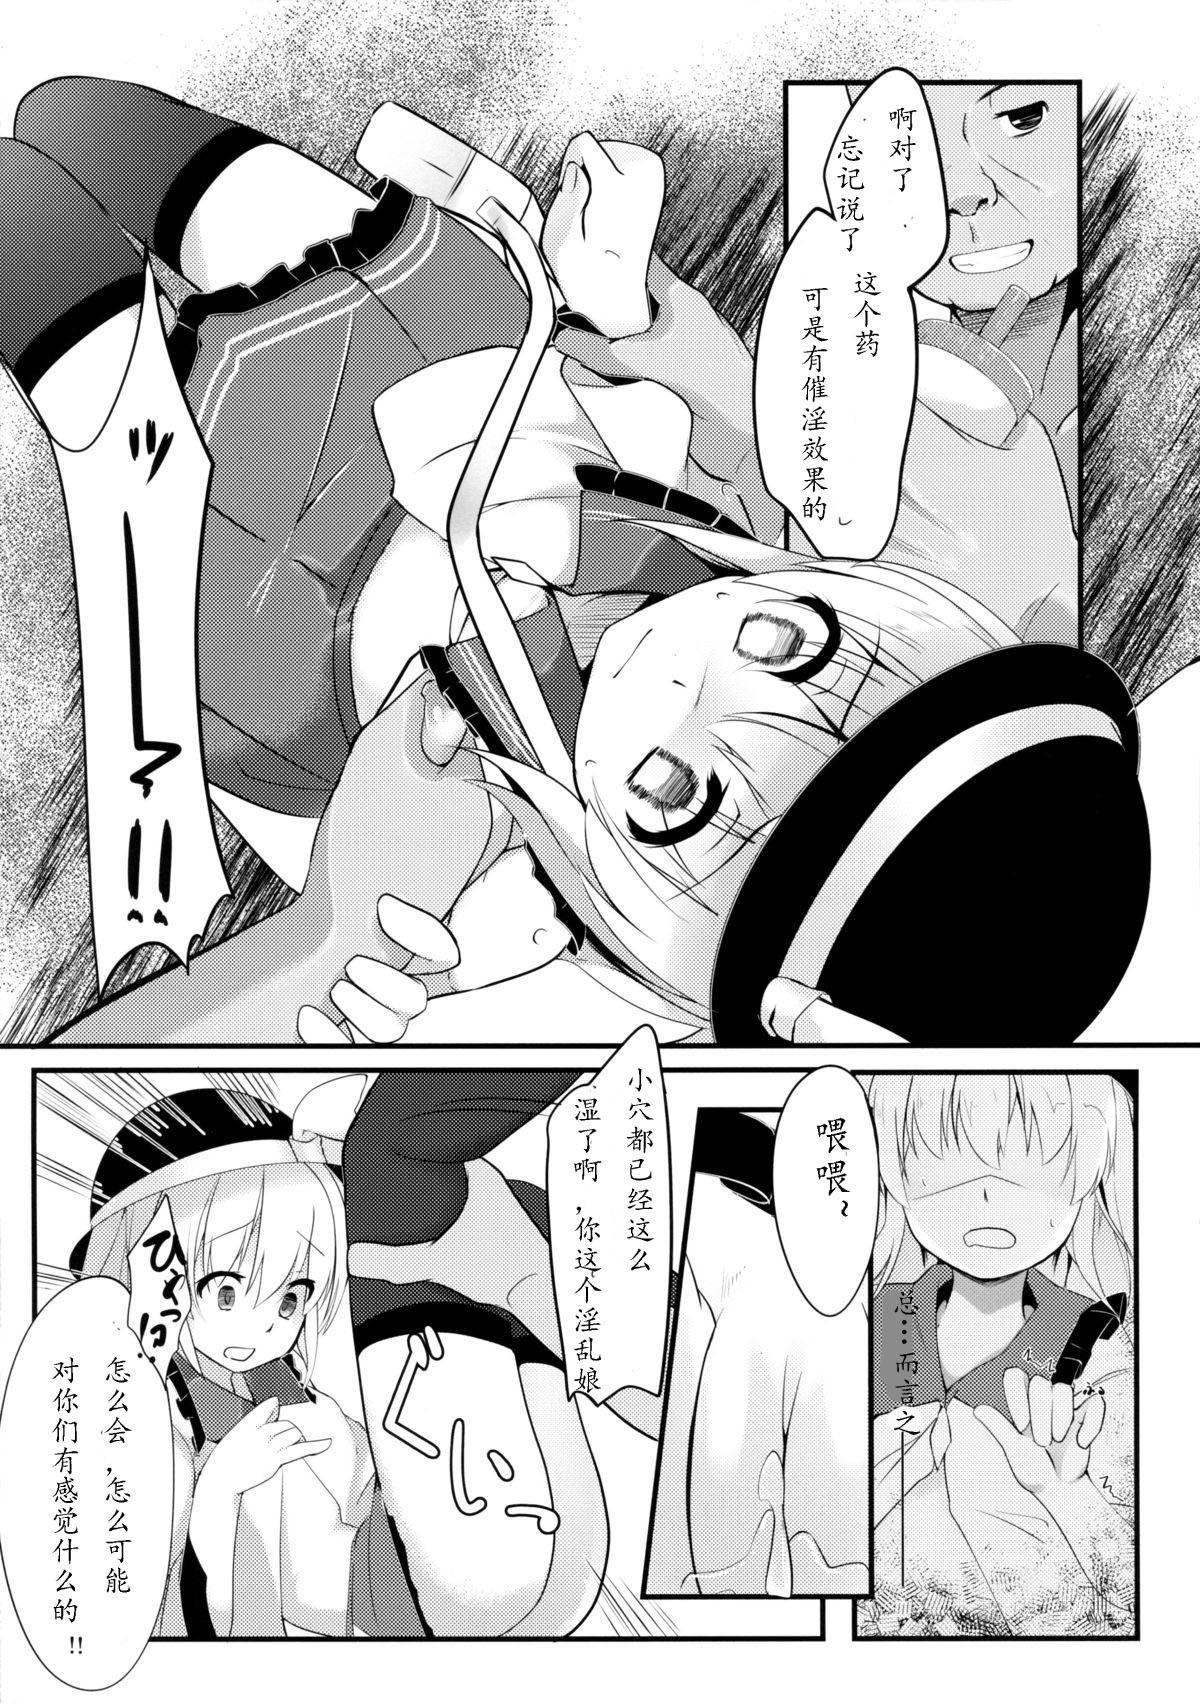 Best Blowjob Ever Koishi Bitch - Touhou project Sucking Cocks - Page 10